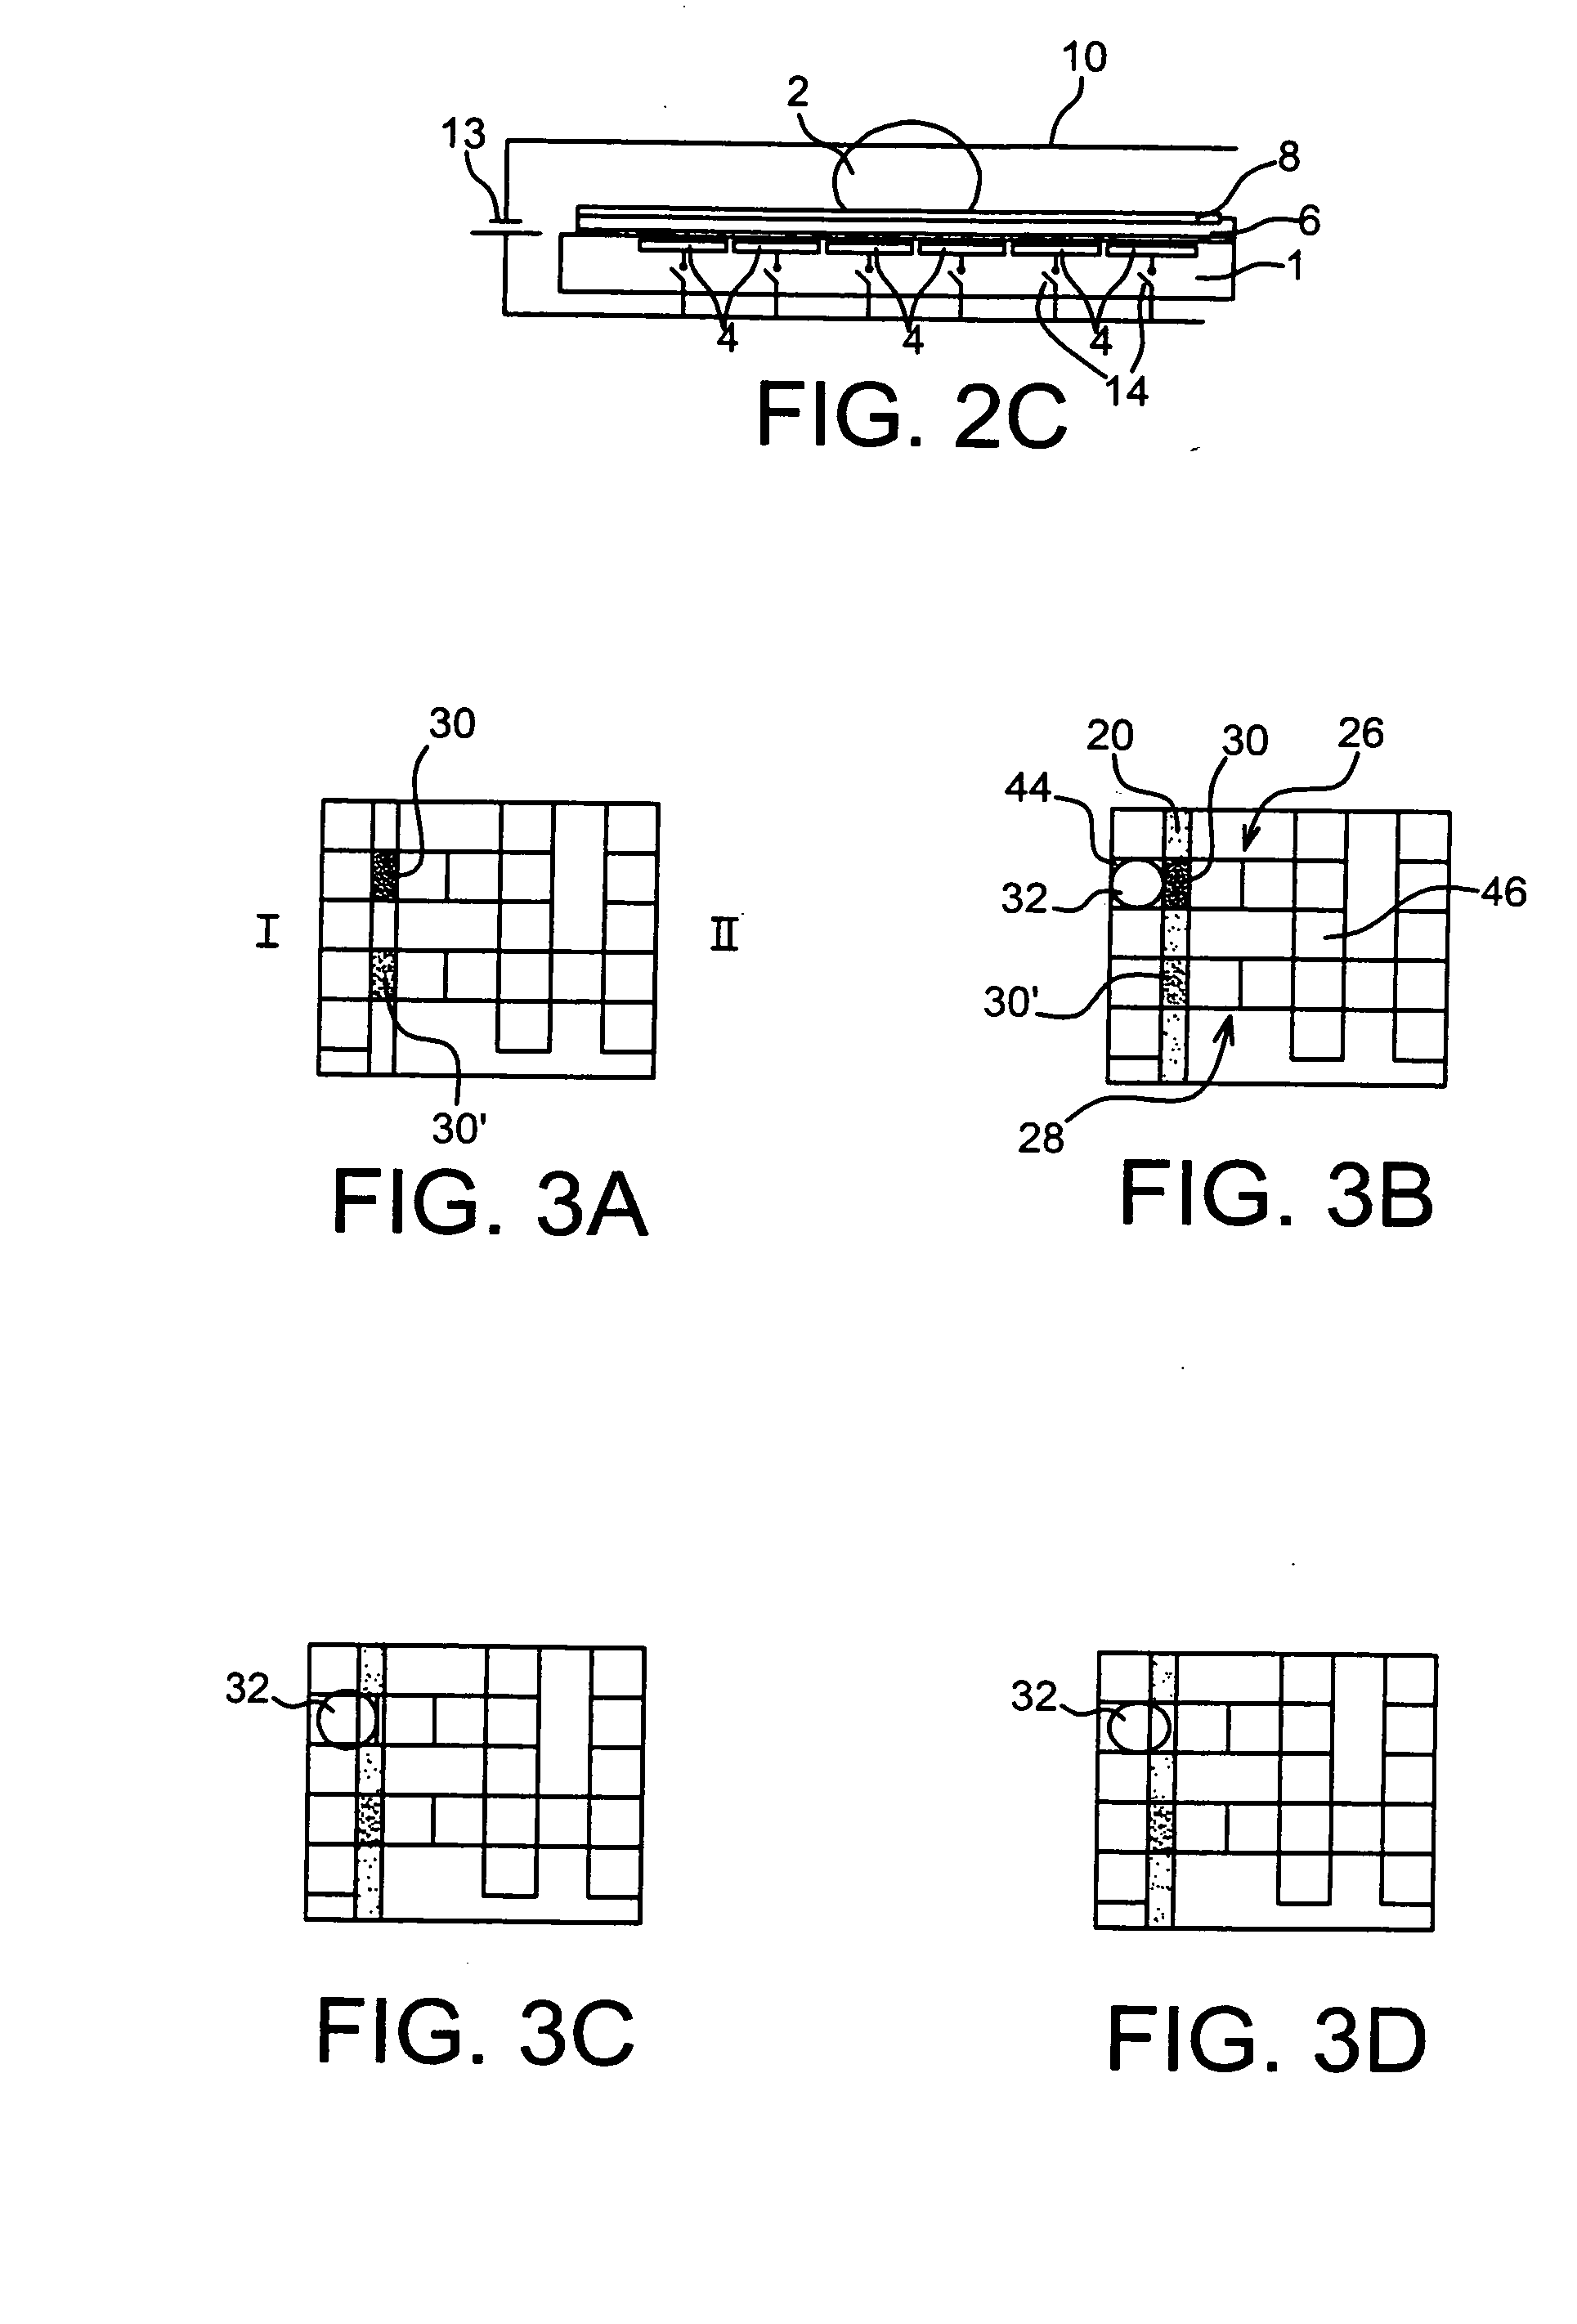 Method for Controlling a Communication Between Two Areas By Electrowetting, a Device Including Areas Isolatable From Each Other and Method for making Such a Device